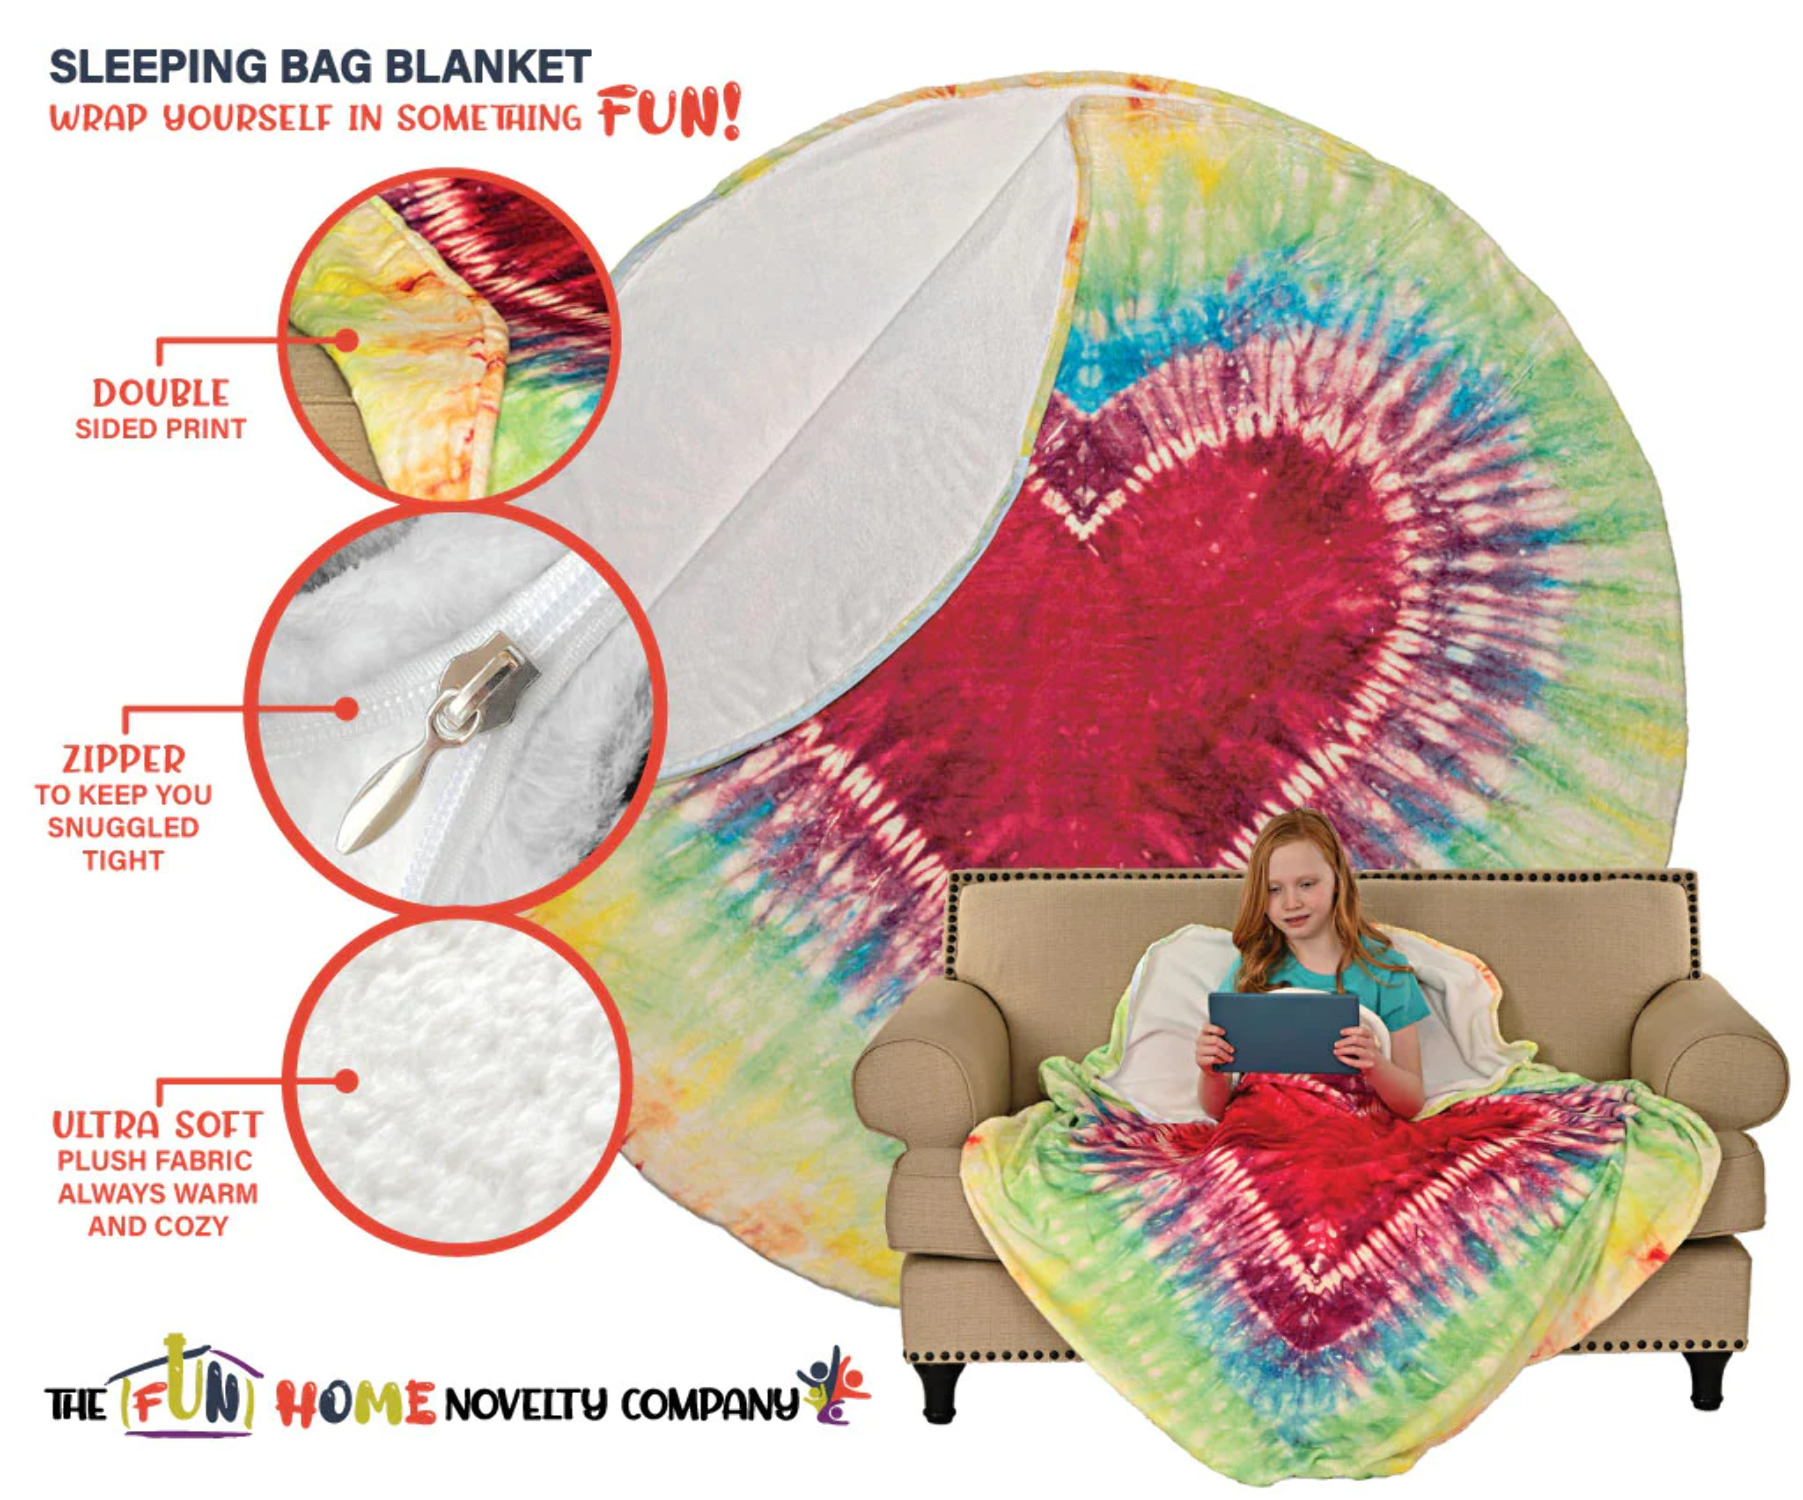 Heart Tie Dye Round Sleeping Bag Blanket 60" Diameter - Cozy Warm Flannel - Novelty Circle Throw Blanket Unique & Fun Love Blanket - Perfect for Kids, Perfect for Birthday Gift - image 3 of 5